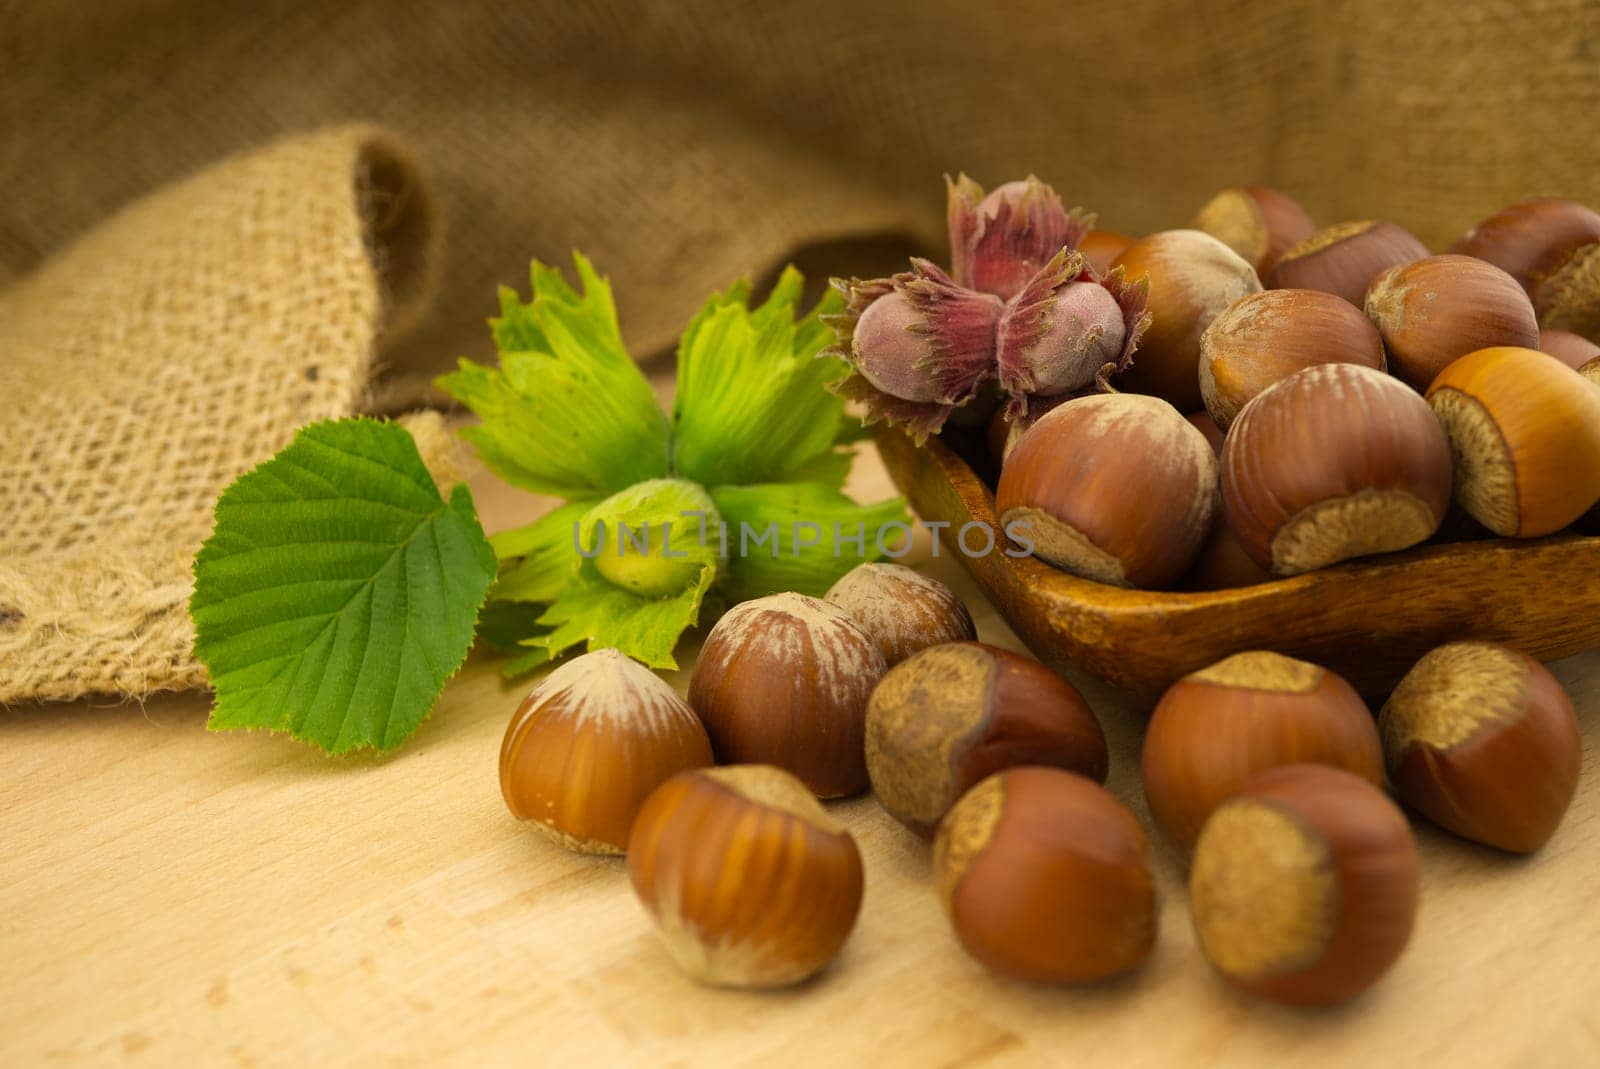 Fresh raw unshelled hazelnuts in front of the jute sack in a selective focus view